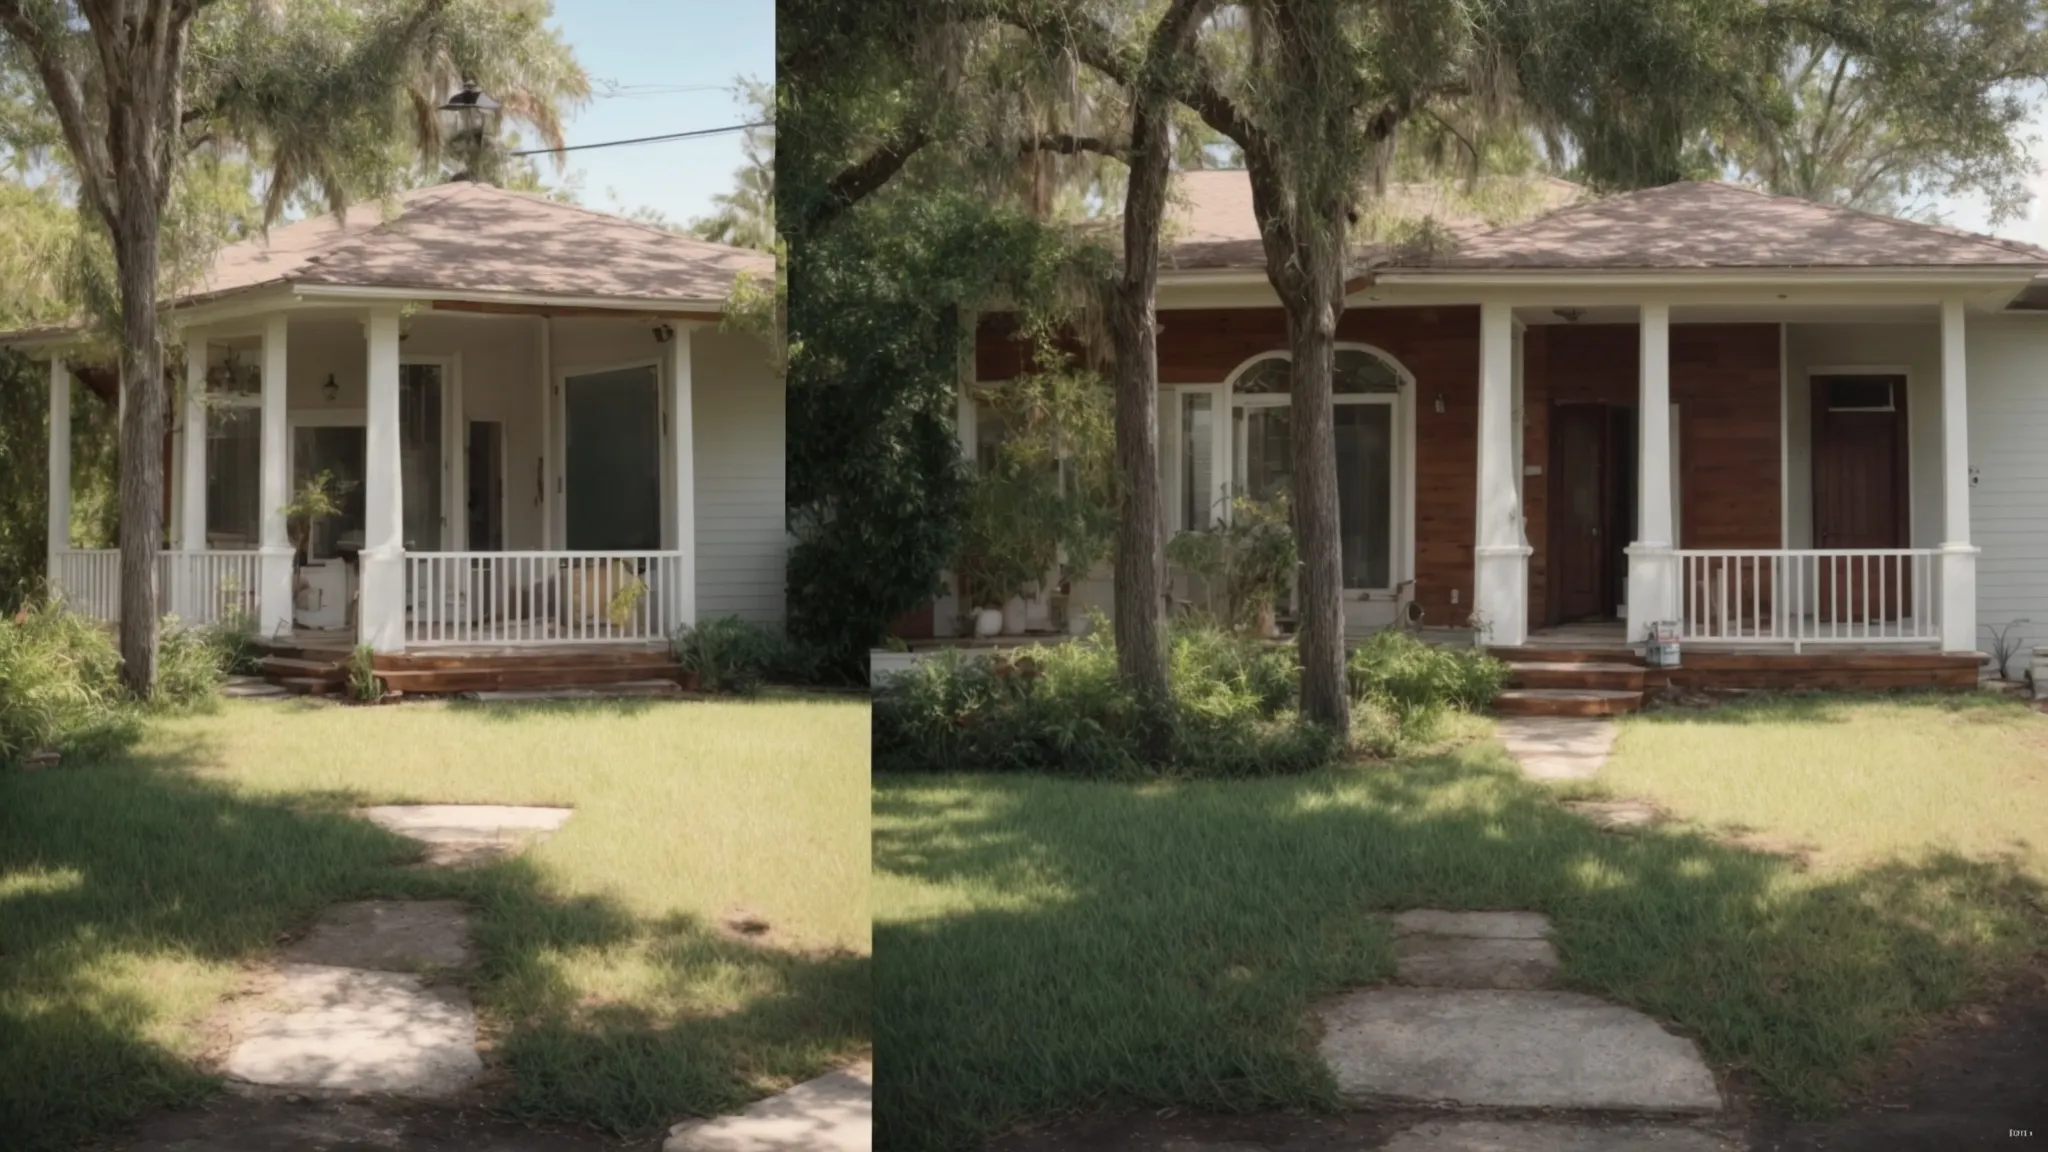 a before-and-after snapshot of a once dull, unkempt house, now shining and immaculately clean under the bright tampa sunshine, showcases the transformative impact of professional washing services.